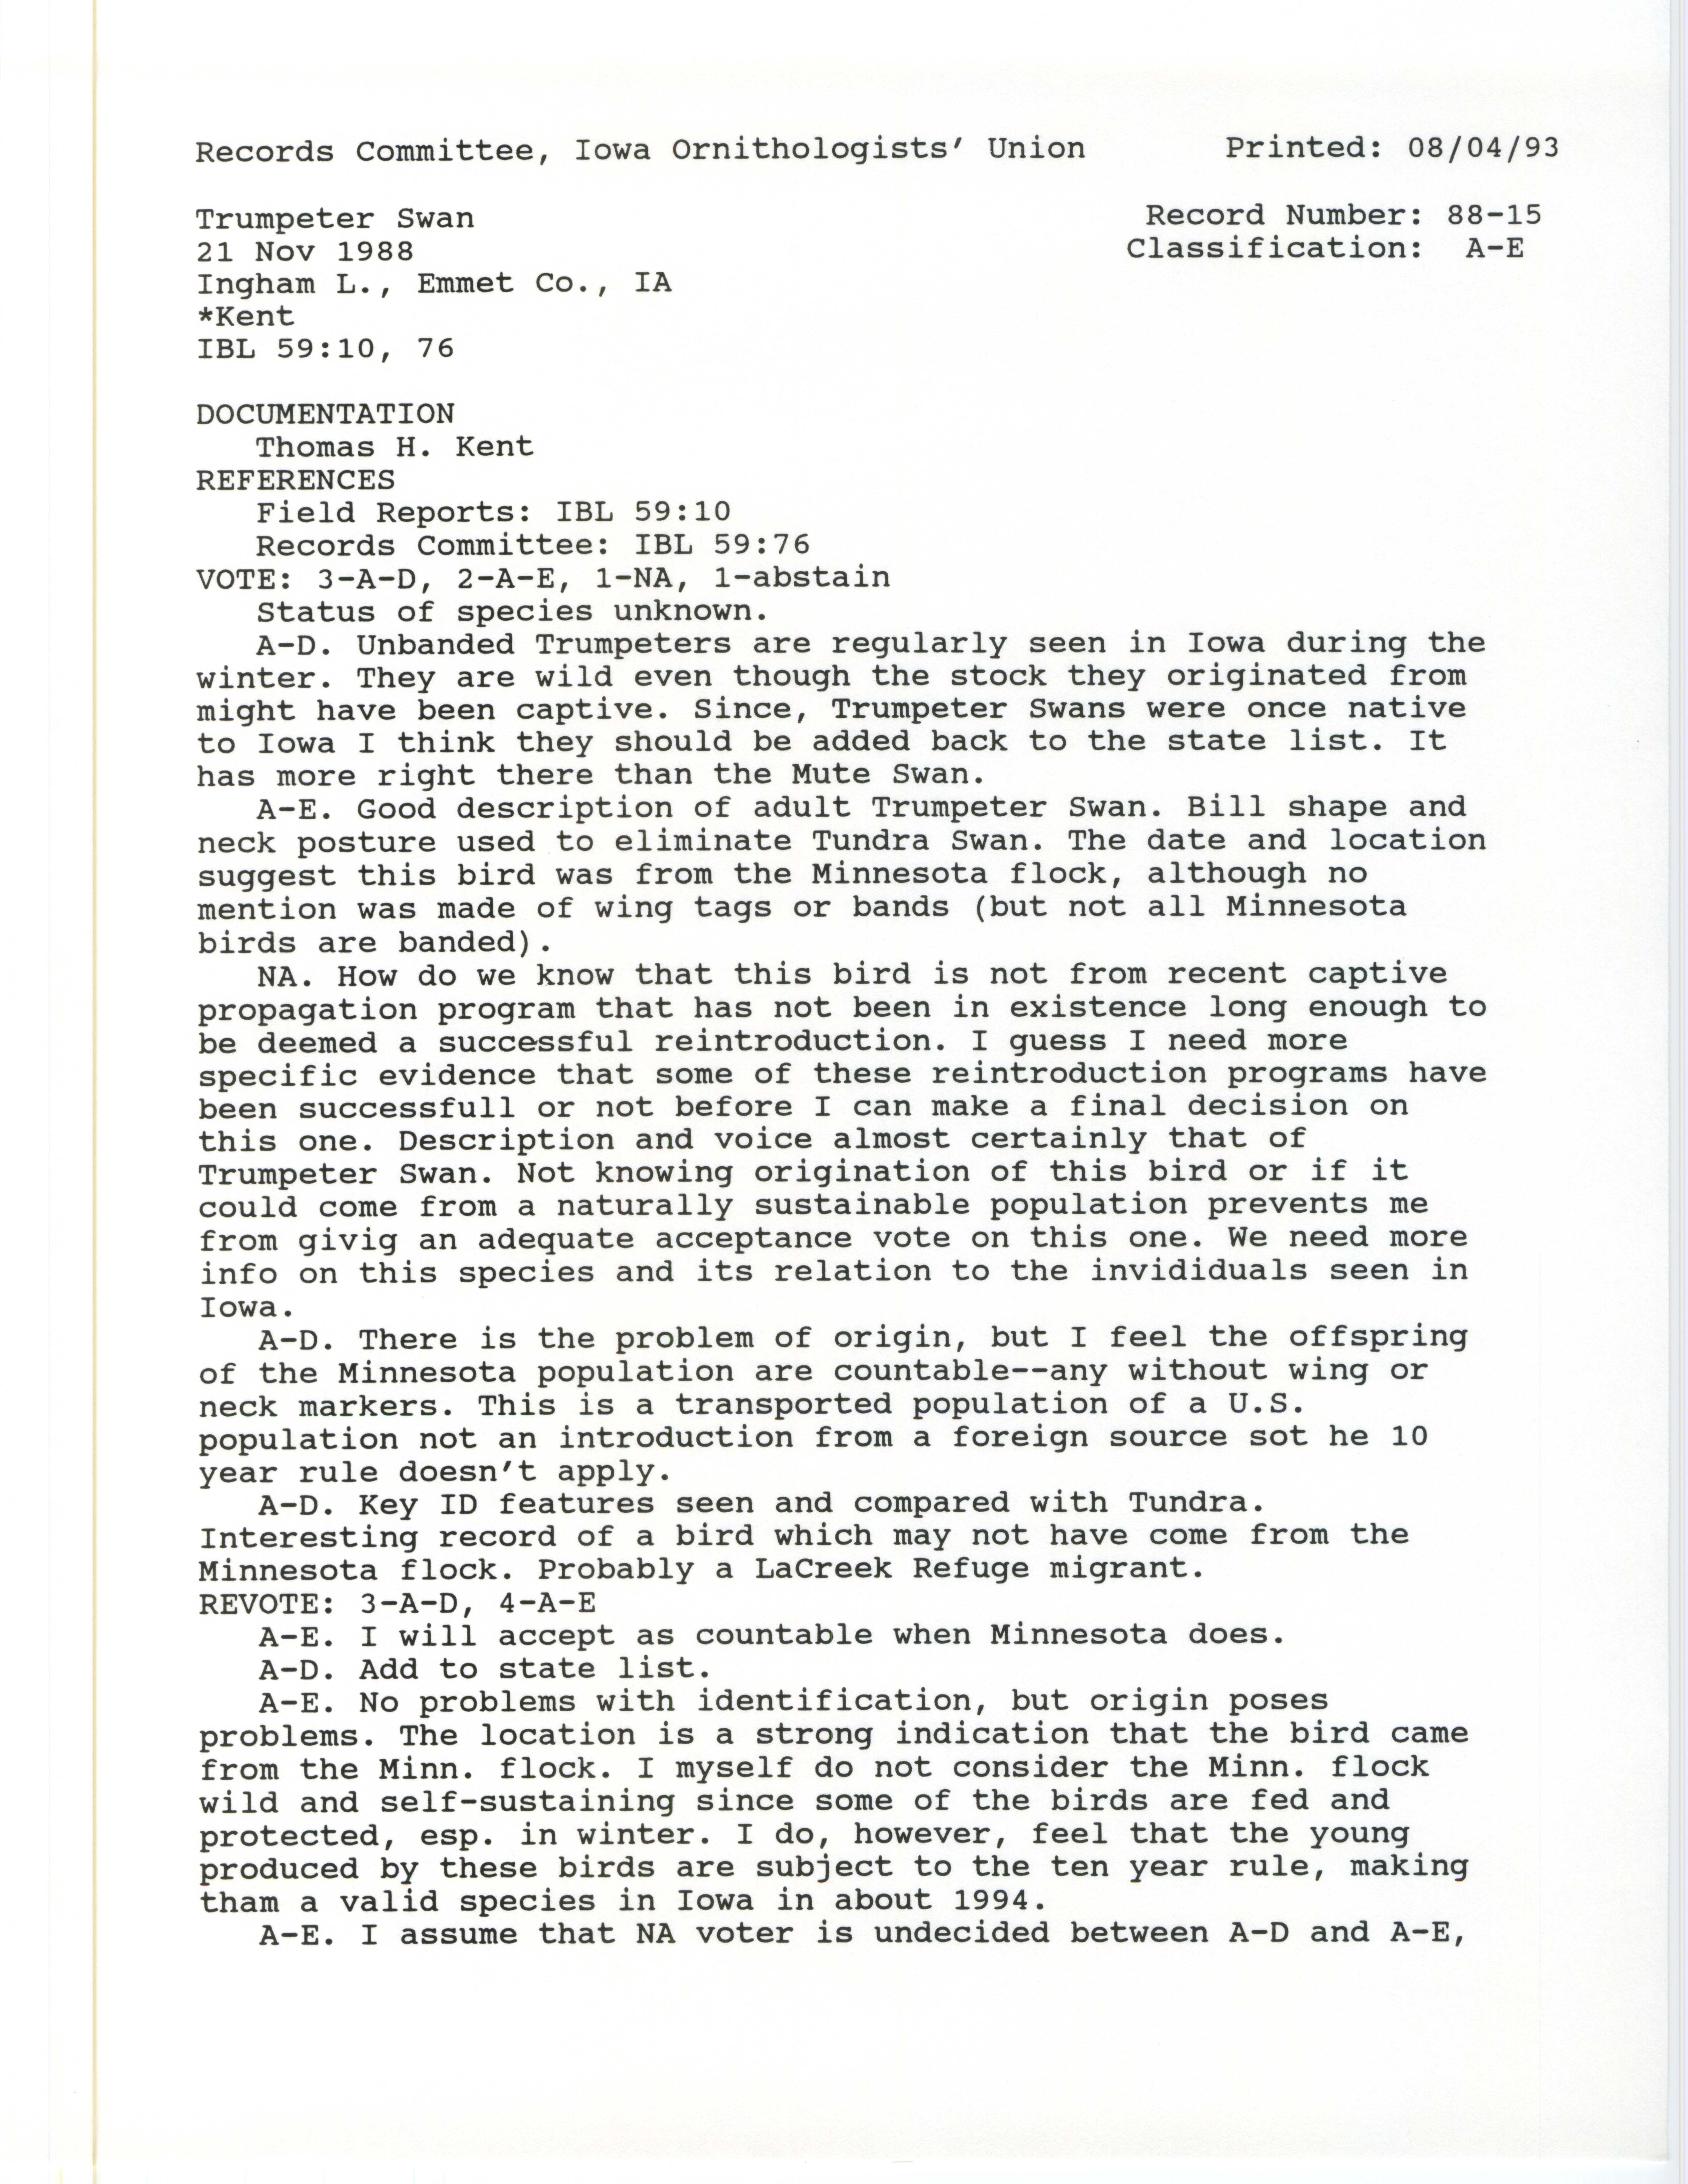 Records Committee review for rare bird sighting of Trumpeter Swan at Ingham Lake, 1988